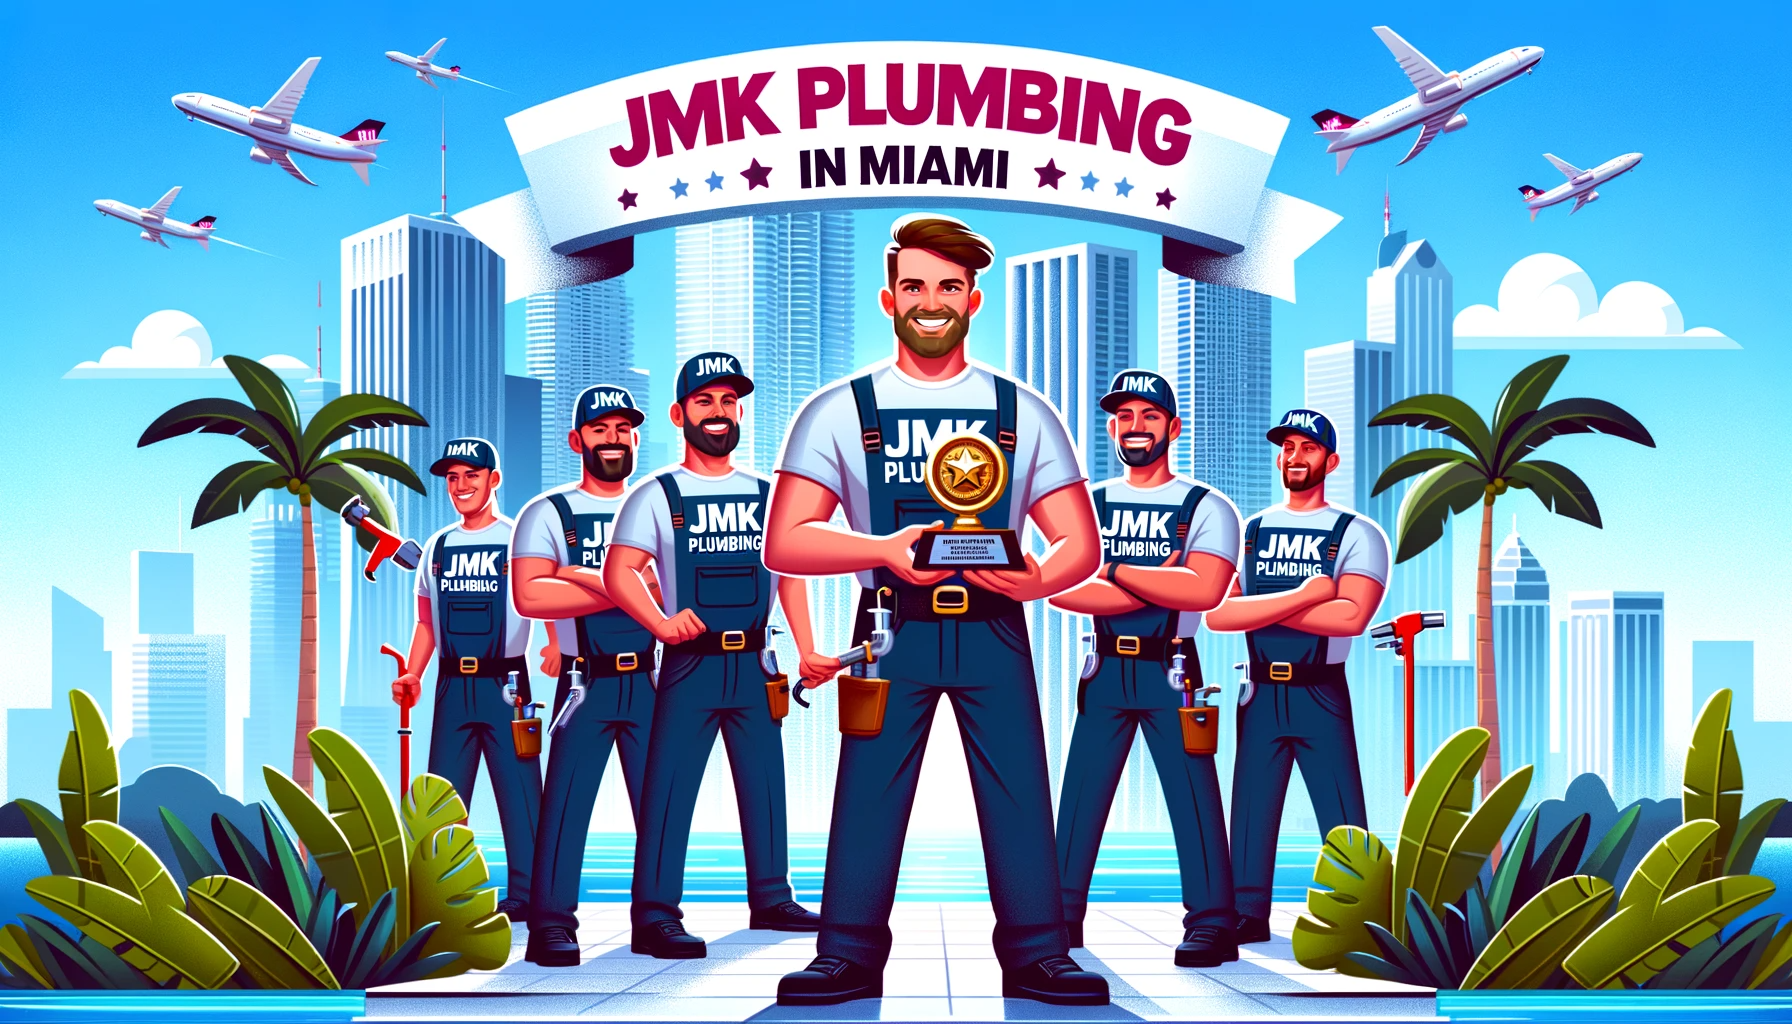 the JMK Plumbing team being celebrated as top-rated plumbing services in Miami.